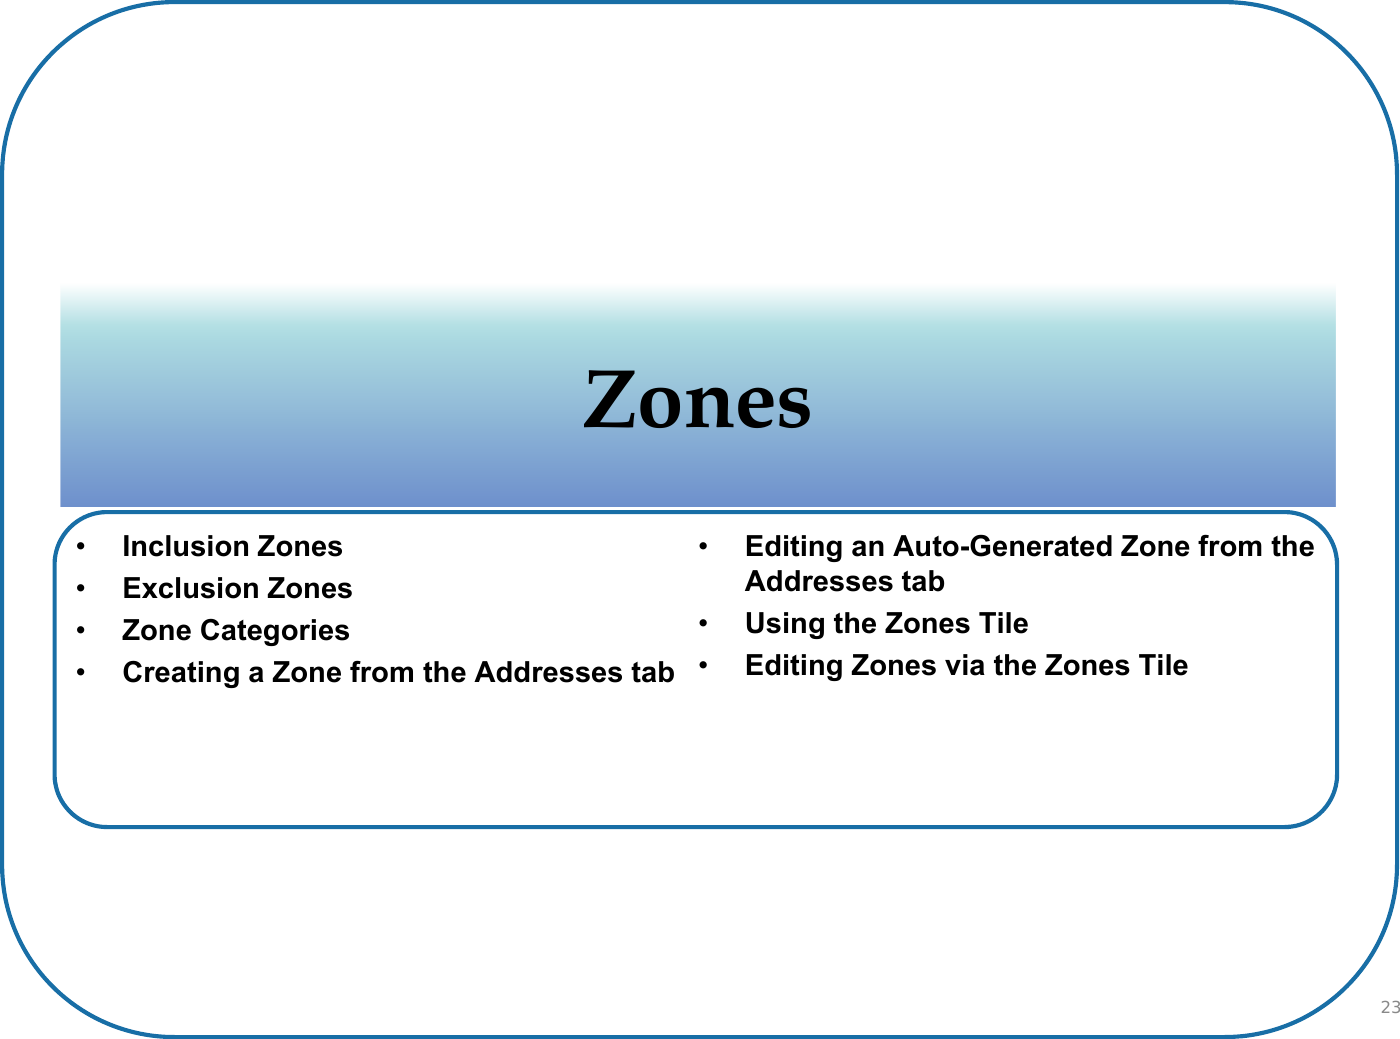 ZonesZones•Inclusion Zones•Exclusion Zones•Zone Categories•Creating a Zone from the Addresses tab•Editing an Auto-Generated Zone from the Addresses tab•Using the Zones Tile•Editing Zones via the Zones Tile23